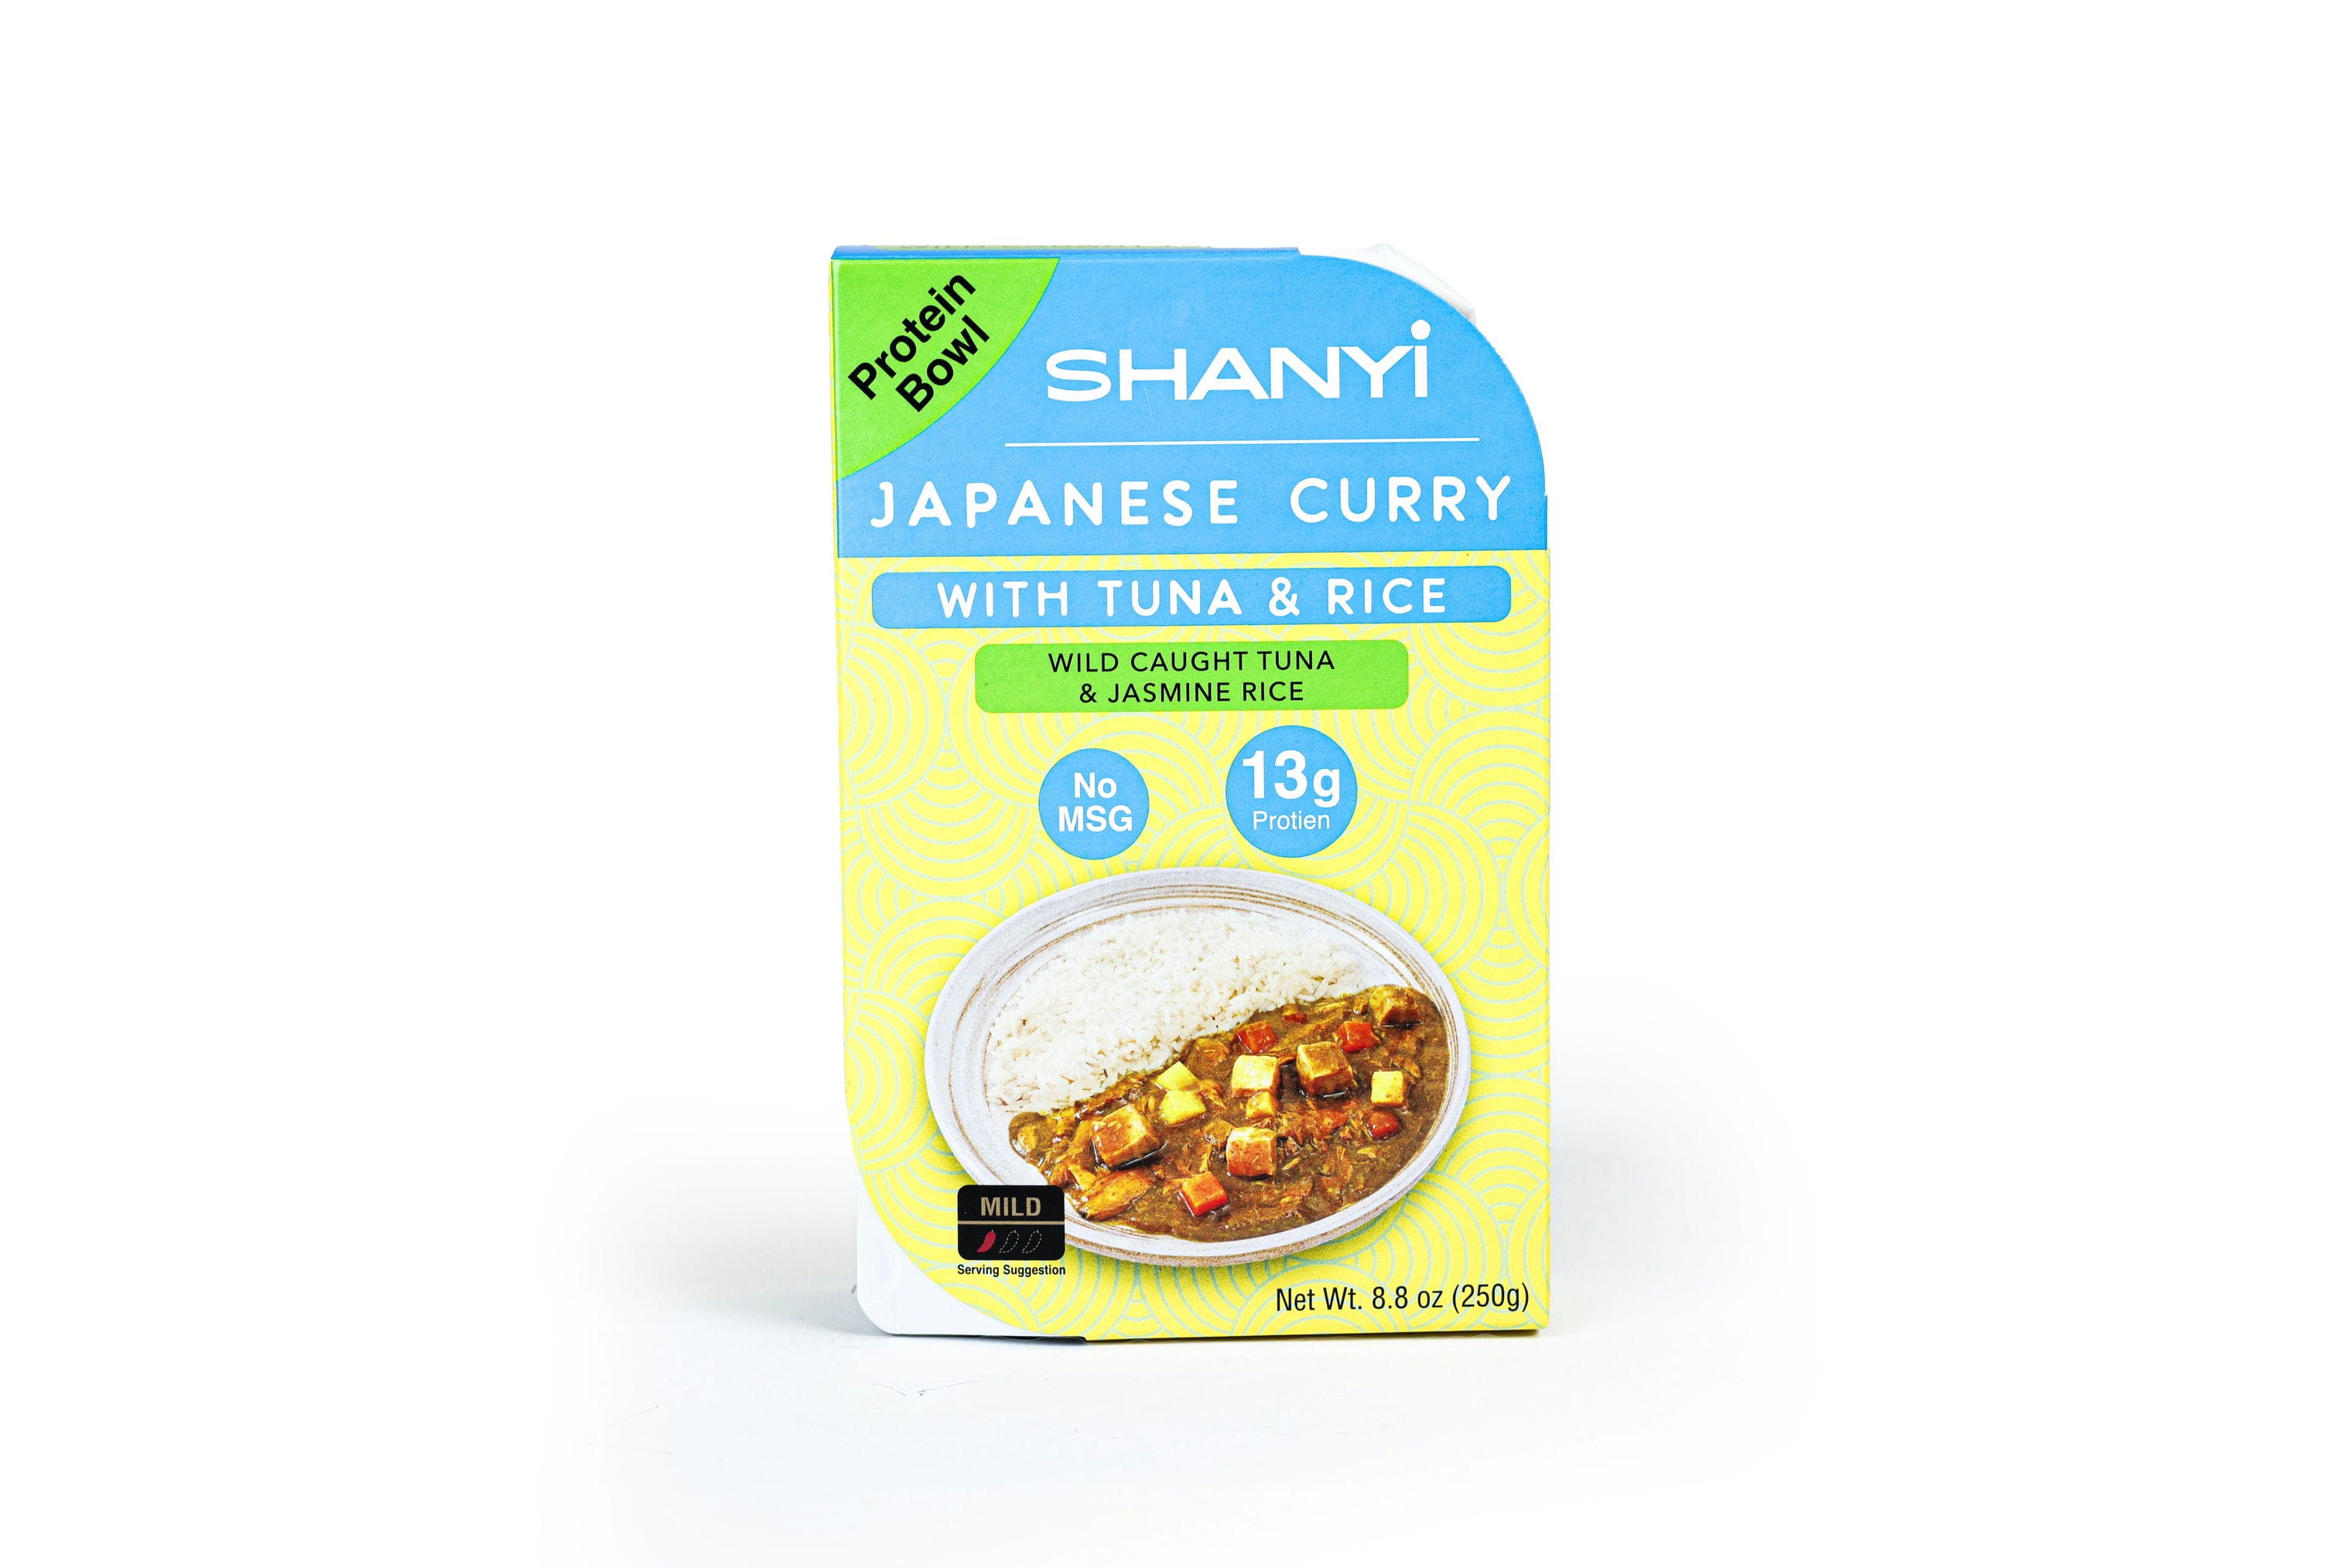 ShanYi Instant Microwave Meals Ready to Eat, 250g/8.8oz, Japanese Curry with Tuna and Jasmine Rice, Case of 6